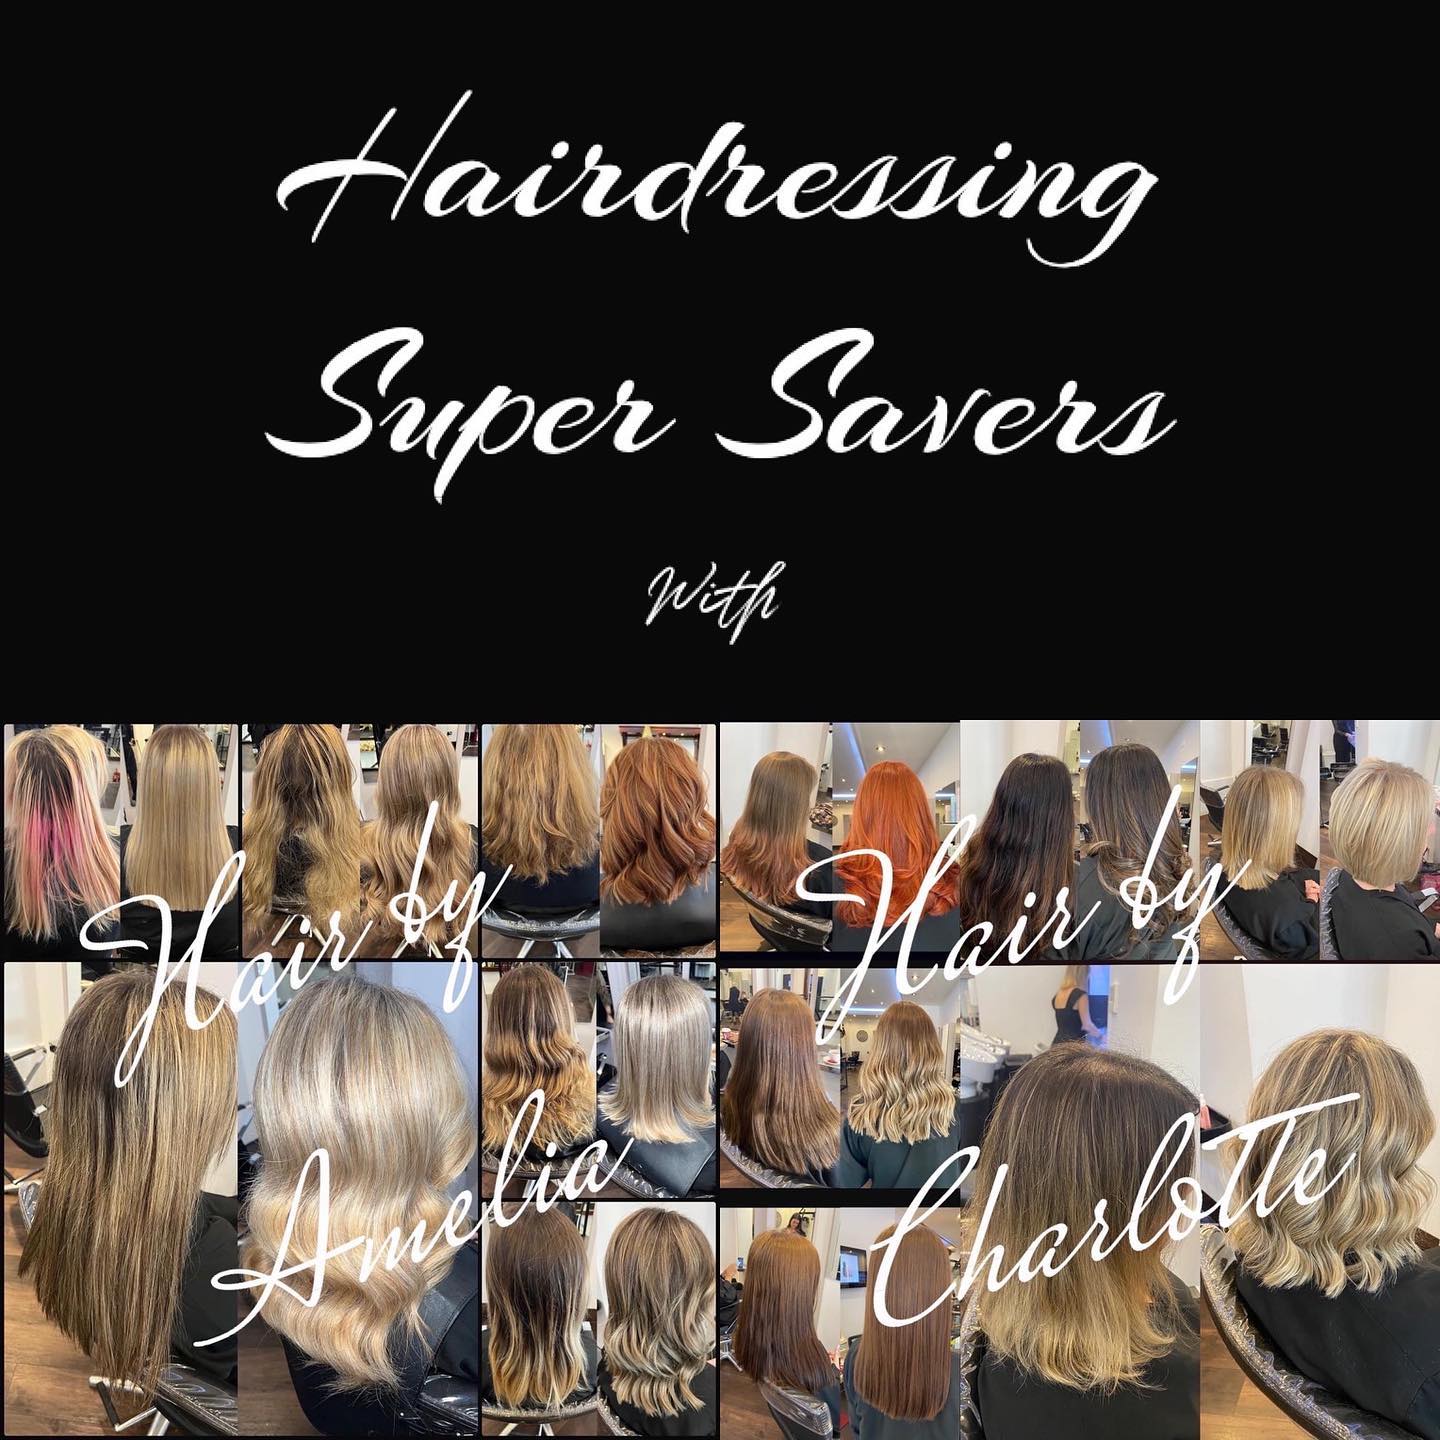 Hairdressing Super Savers Offers